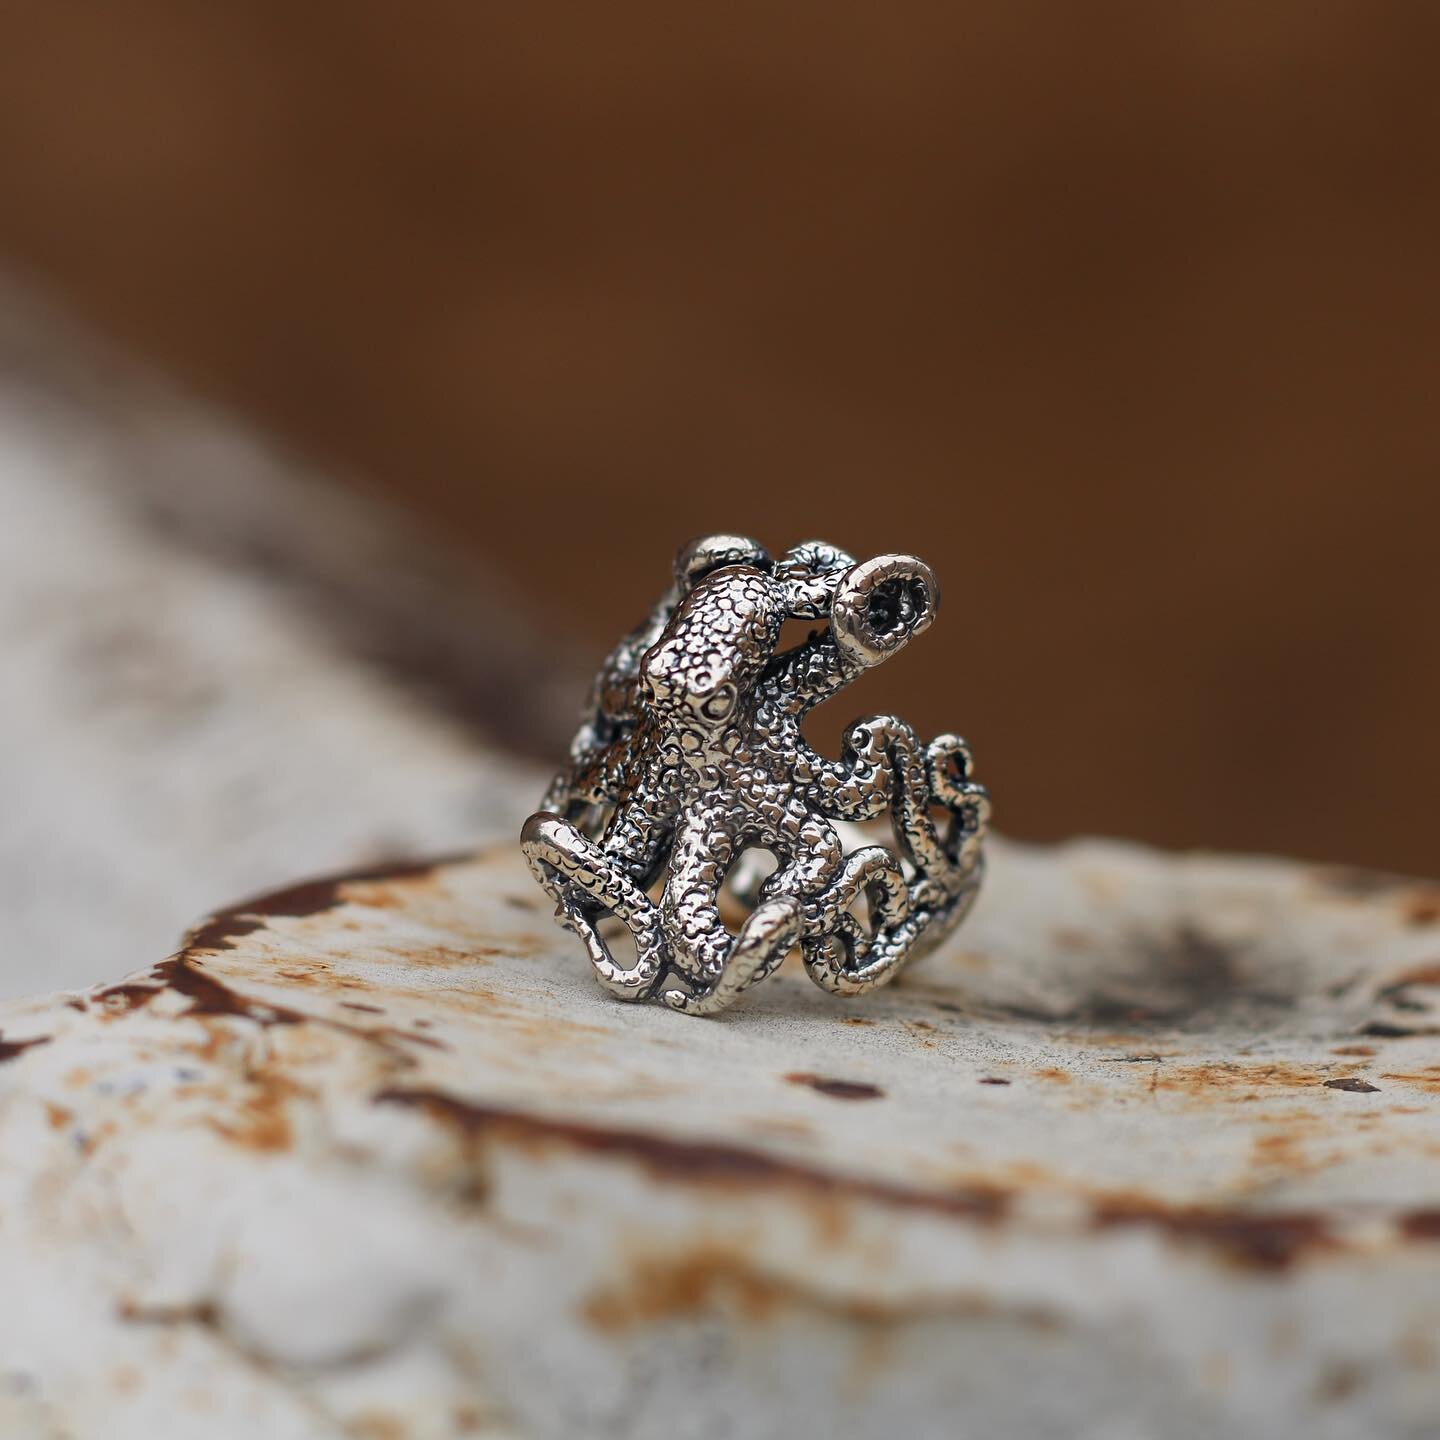 Meet an icon from our Sea Life Collection, the Octopus Ring. It&rsquo;s a detailed work of art handcrafted in the heart of the American Southwest.
&bull;
&bull;
&bull;
&bull;
#Kabana925 #KabanaJewelry #SterlingSilver #925SterlingSilver #AmericanSouth